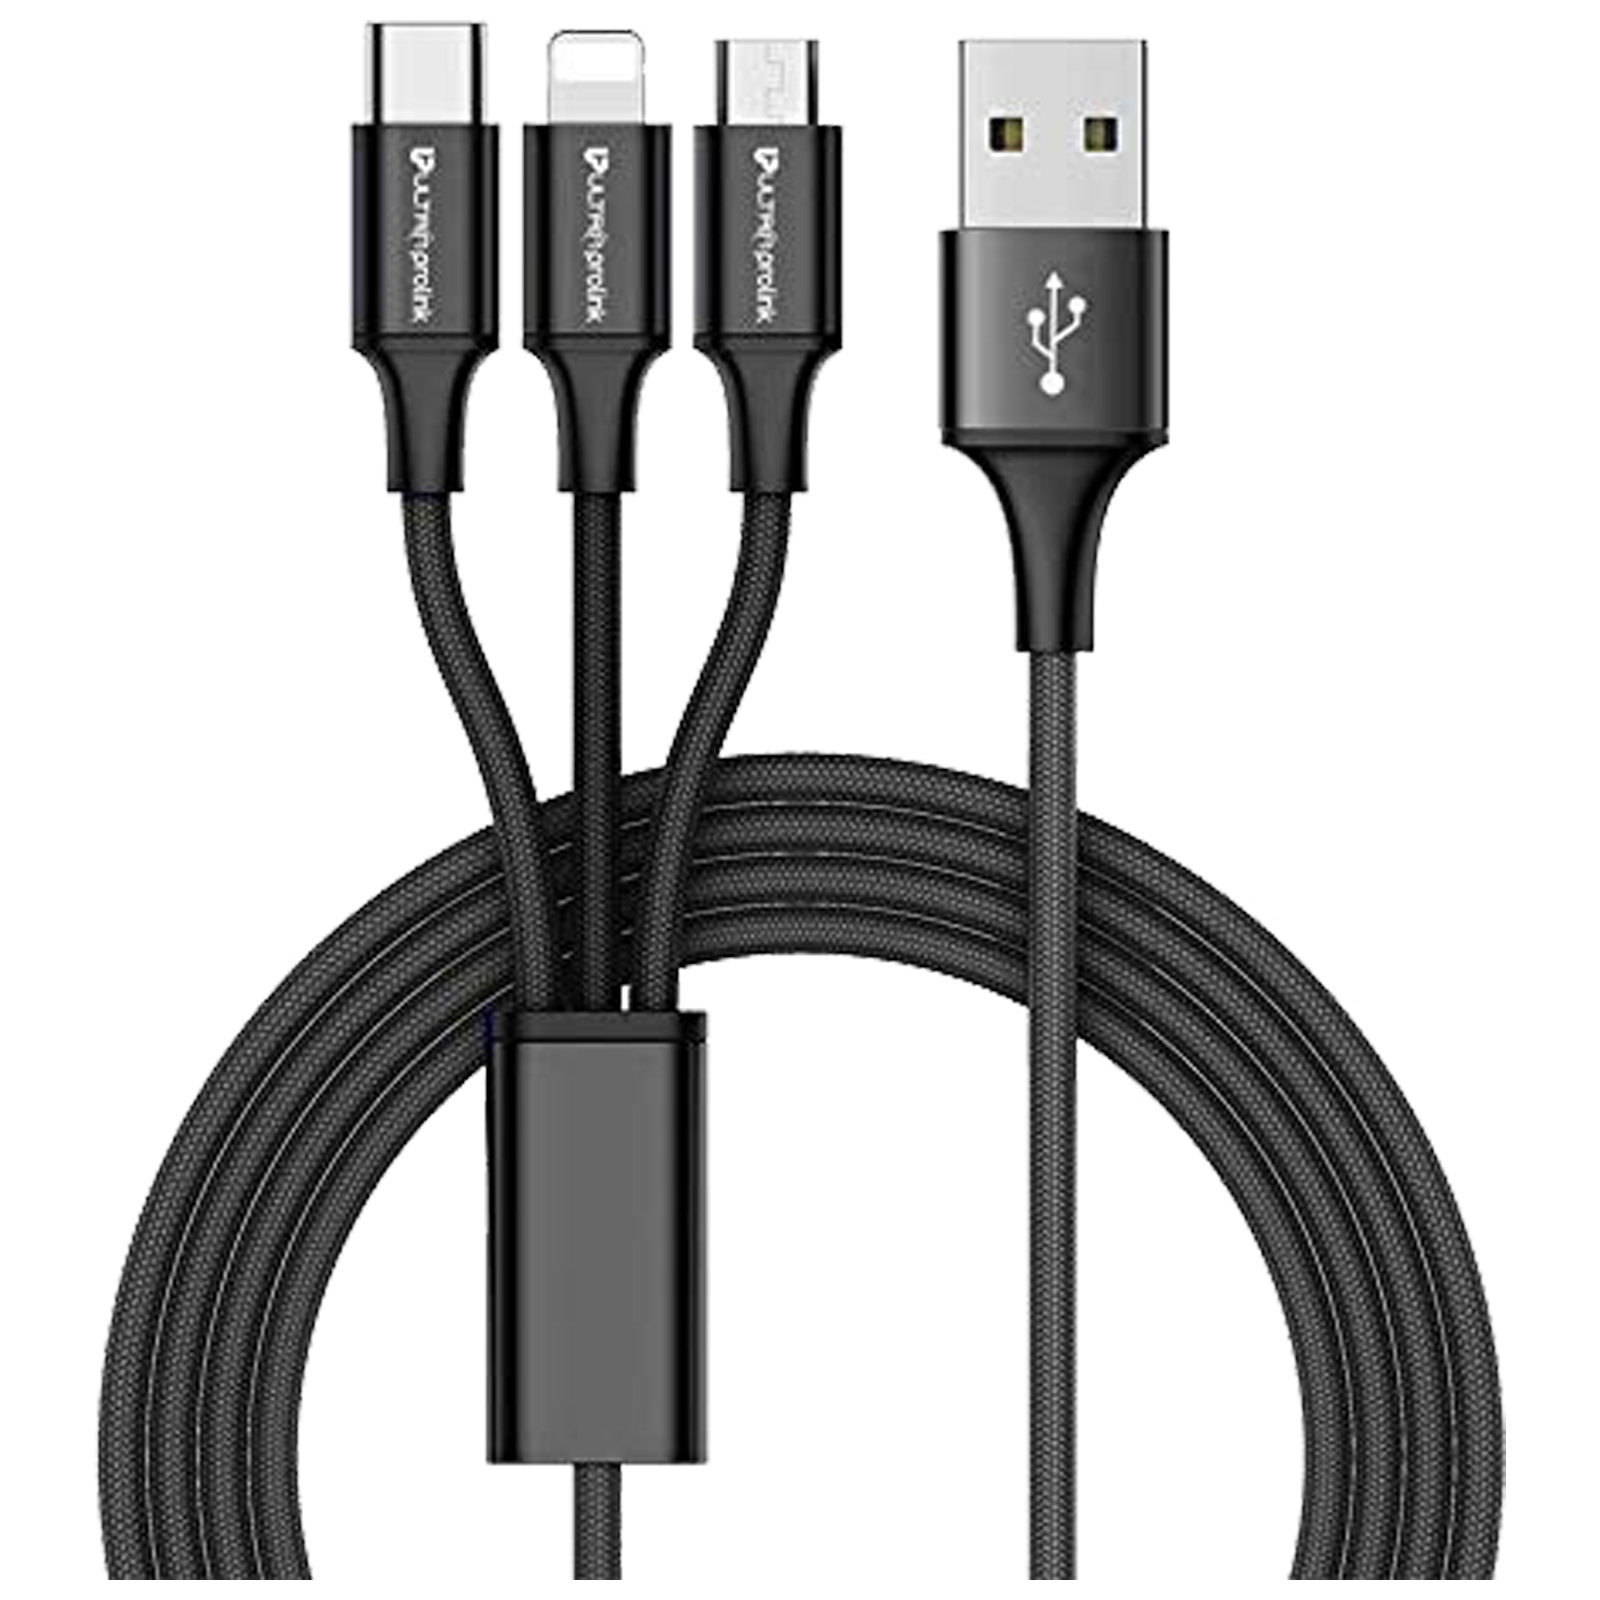 Ultraprolink Trio Link Nylon Fiber 1.5 Meter USB 3.0 to Lightning, USB Type C, Micro USB 2.0 Fast Charging and Data Transfer USB Cable (Nylon Braided Cable, UL1015BLK-0150, Black)_1